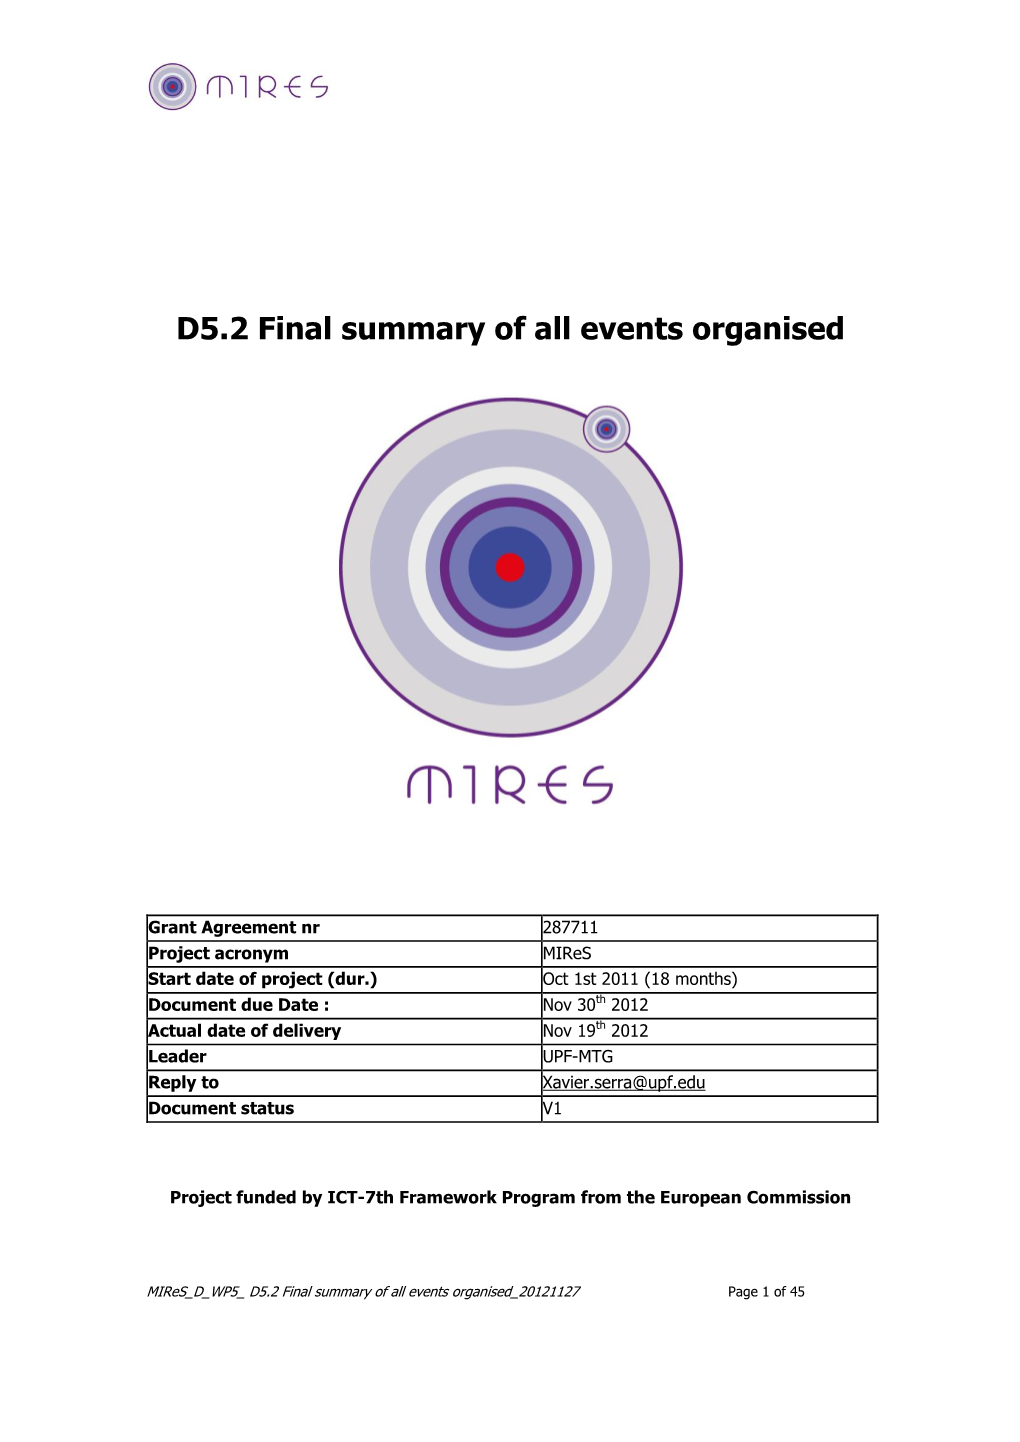 D5.2 Final Summary of All Events Organised